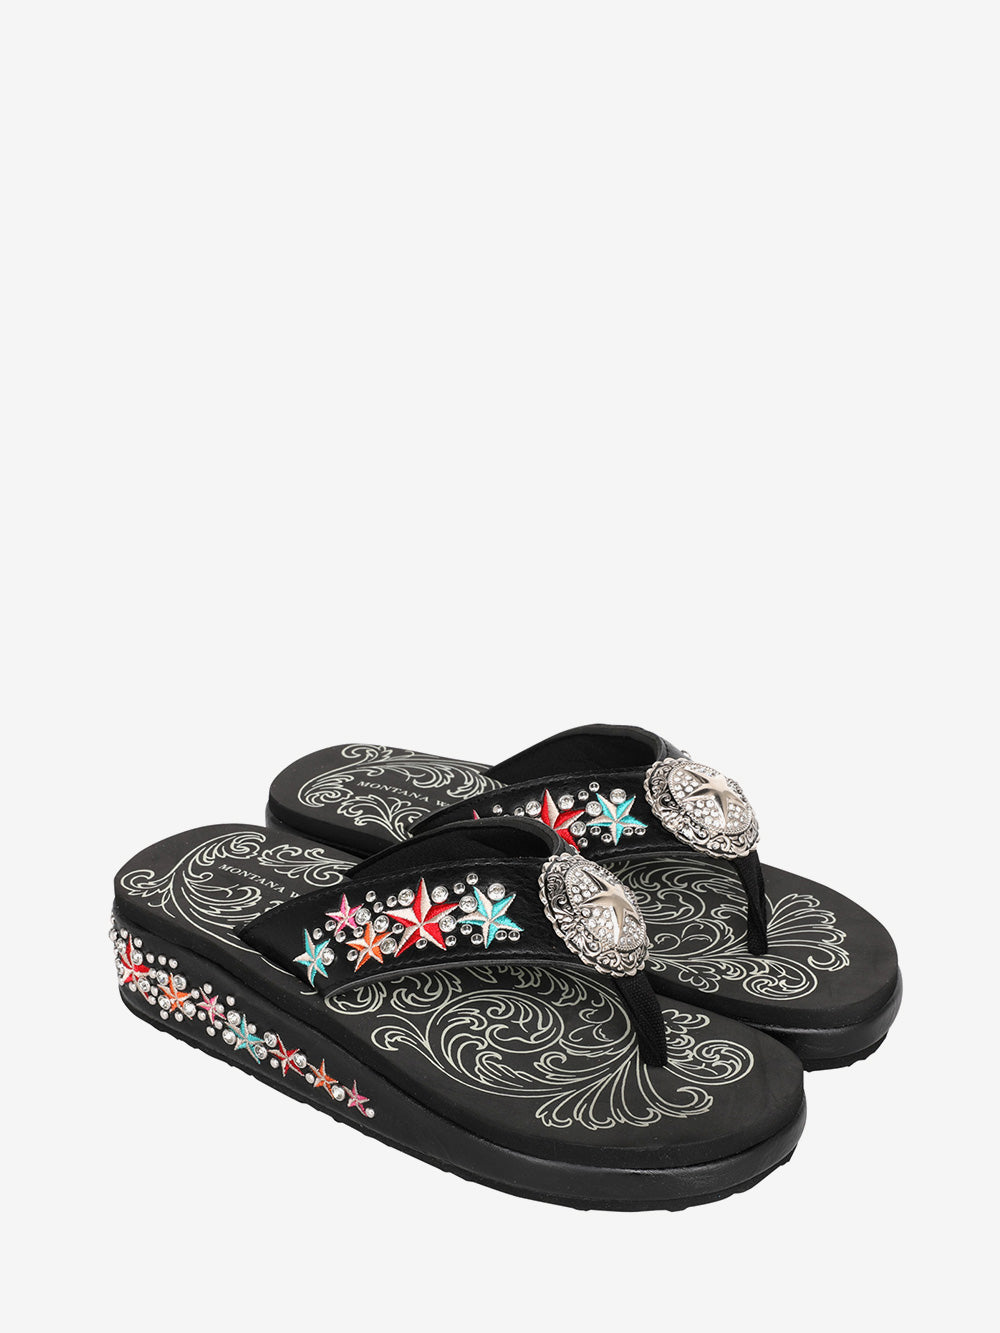 Montana West Embroidered Star Concho Flip Flops - Montana West World